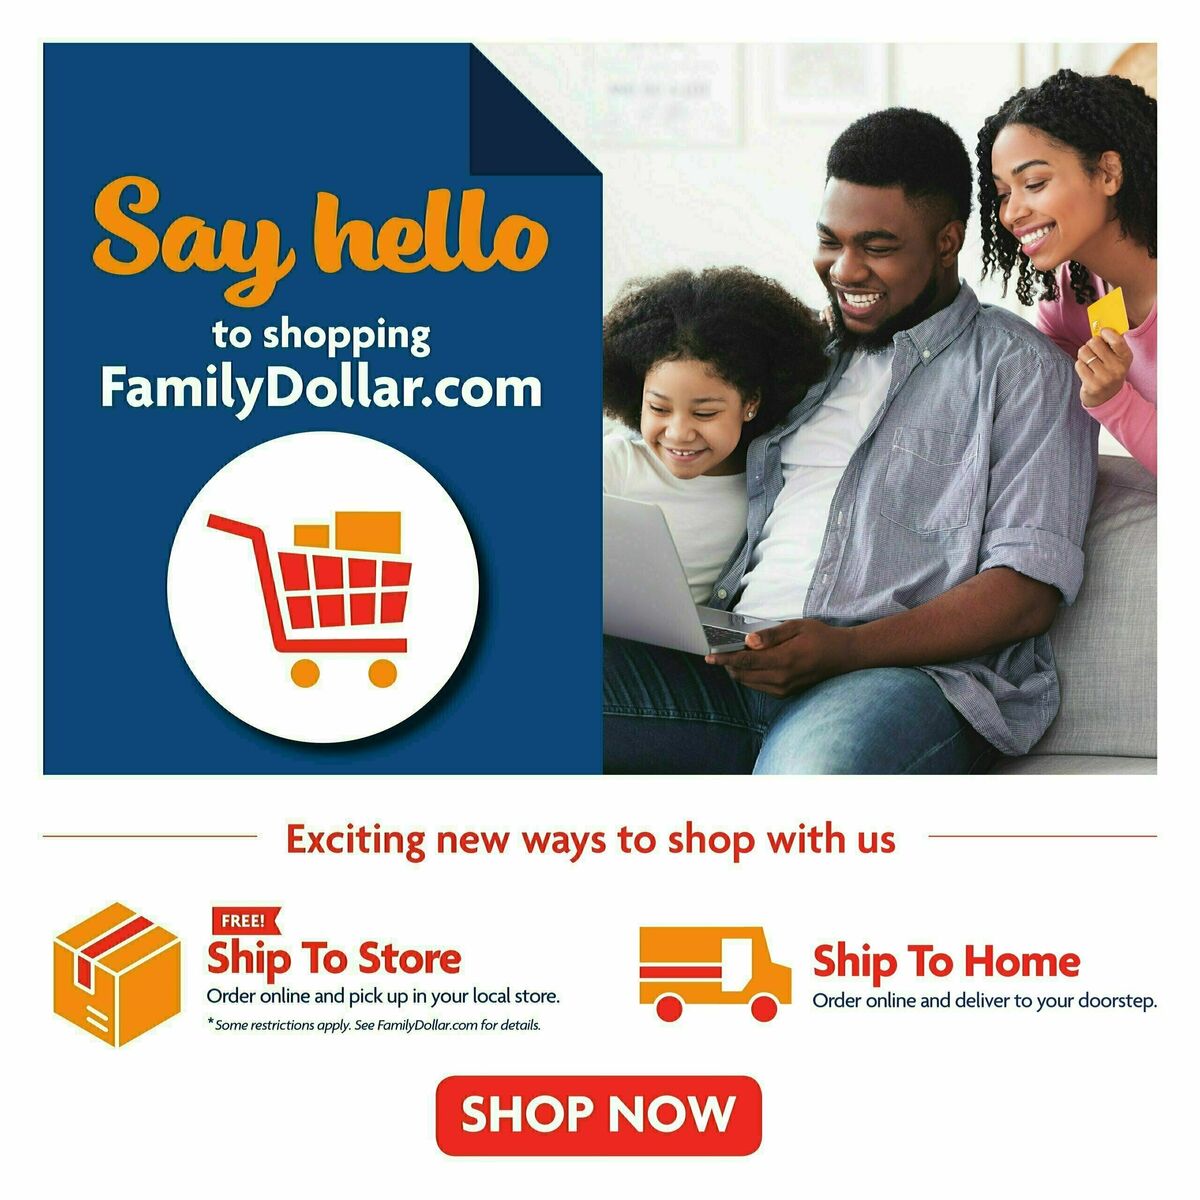 Family Dollar Weekly Ad from January 14